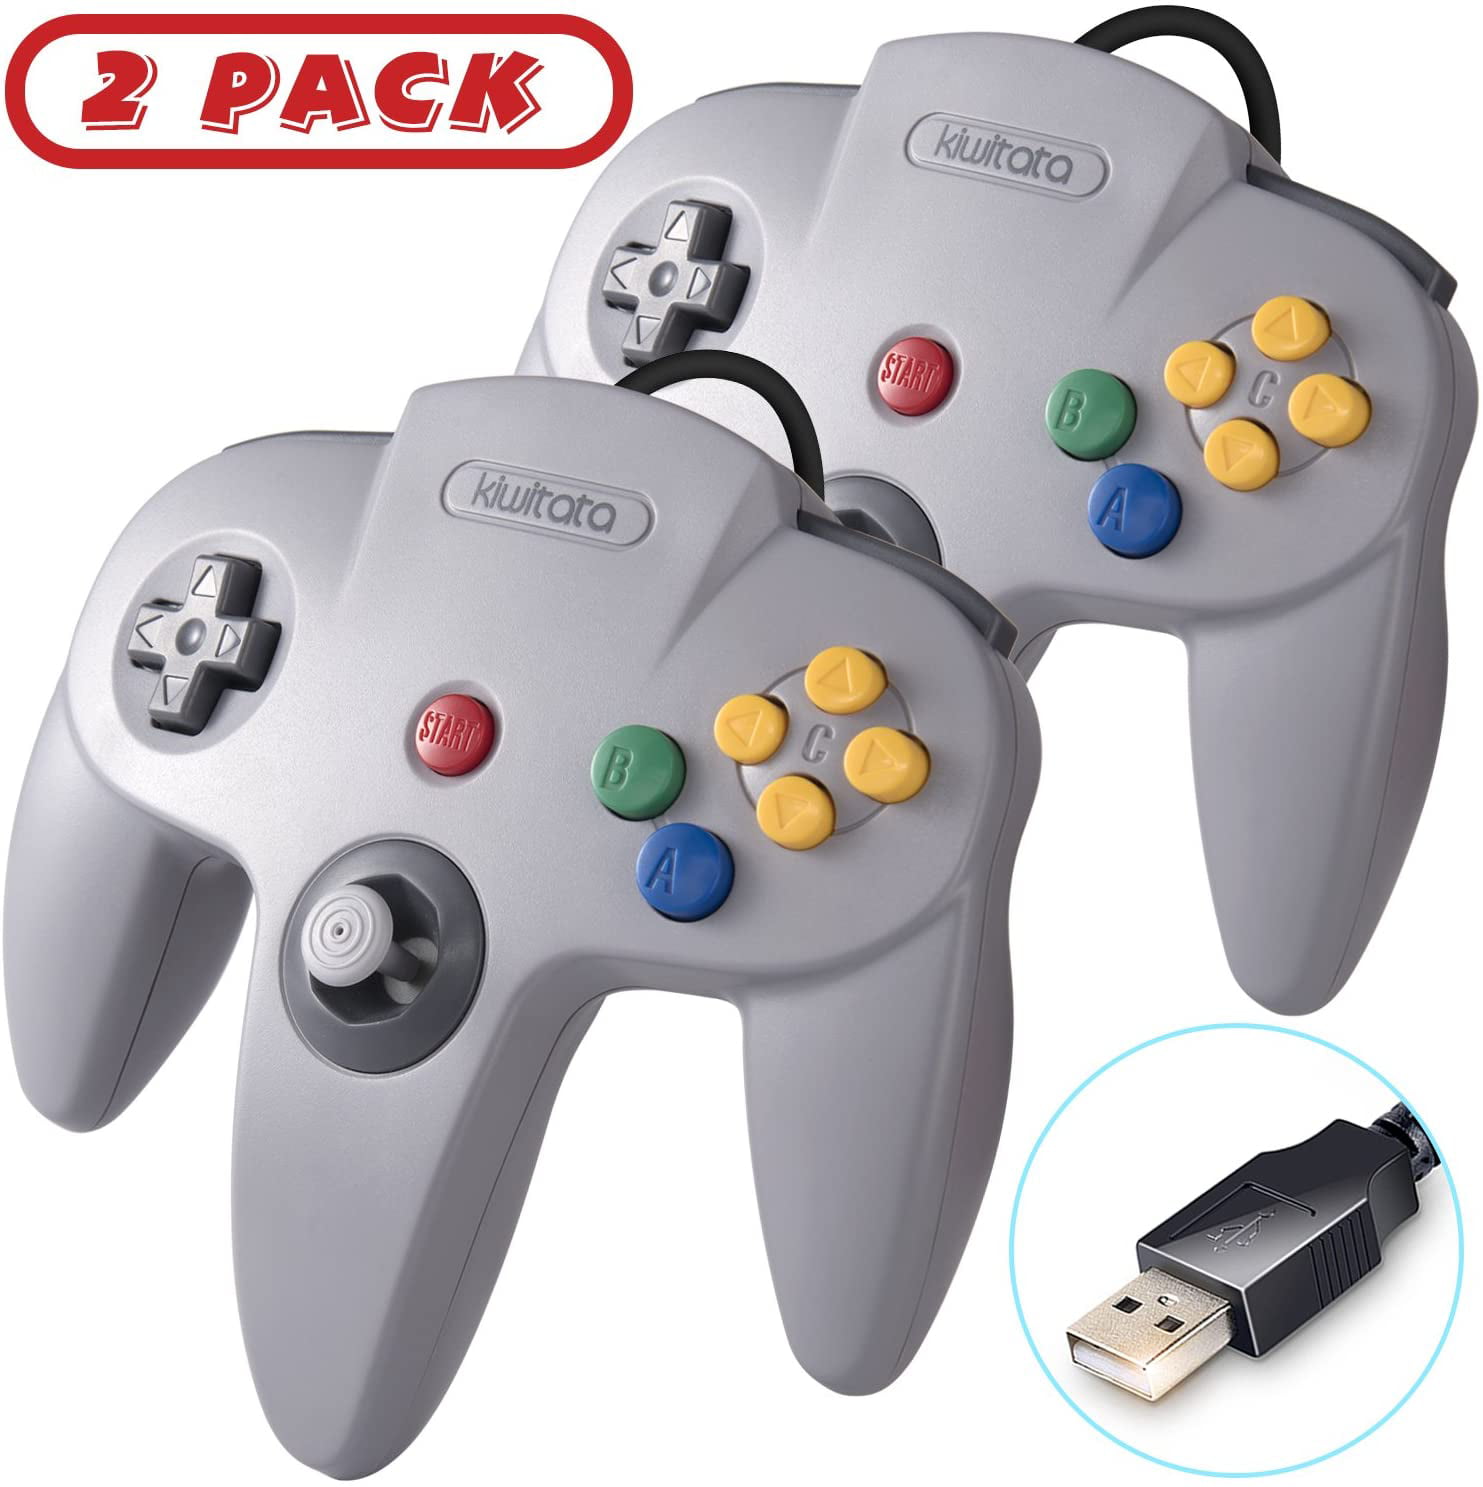 Grey 3rd Party Classic Retro N64 Bit USB Wired Controller for PC and MAC 